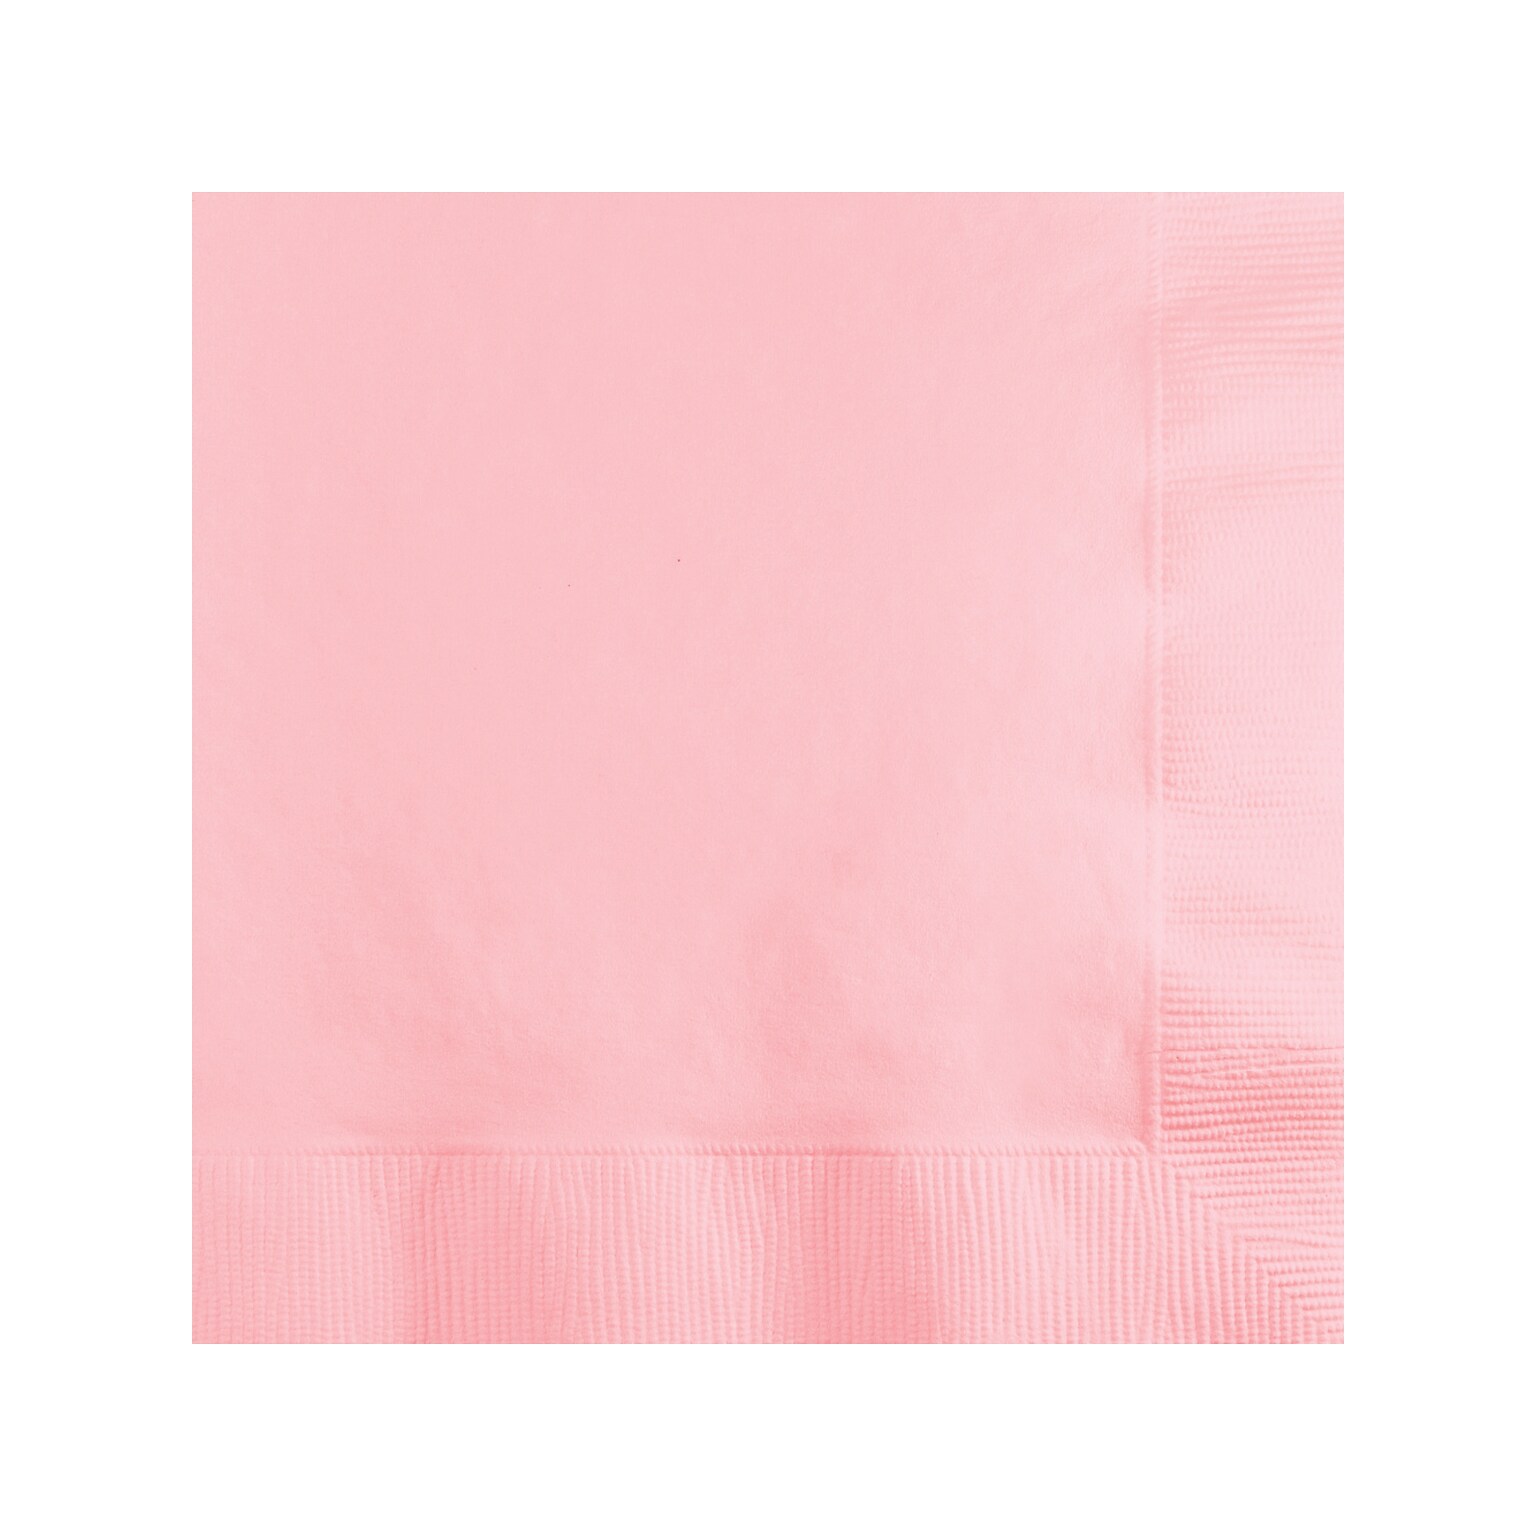 Creative Converting Touch of Color Beverage Napkin, 2-Ply, Classic Pink, 150 Napkins/Pack (DTC139190154BNP)